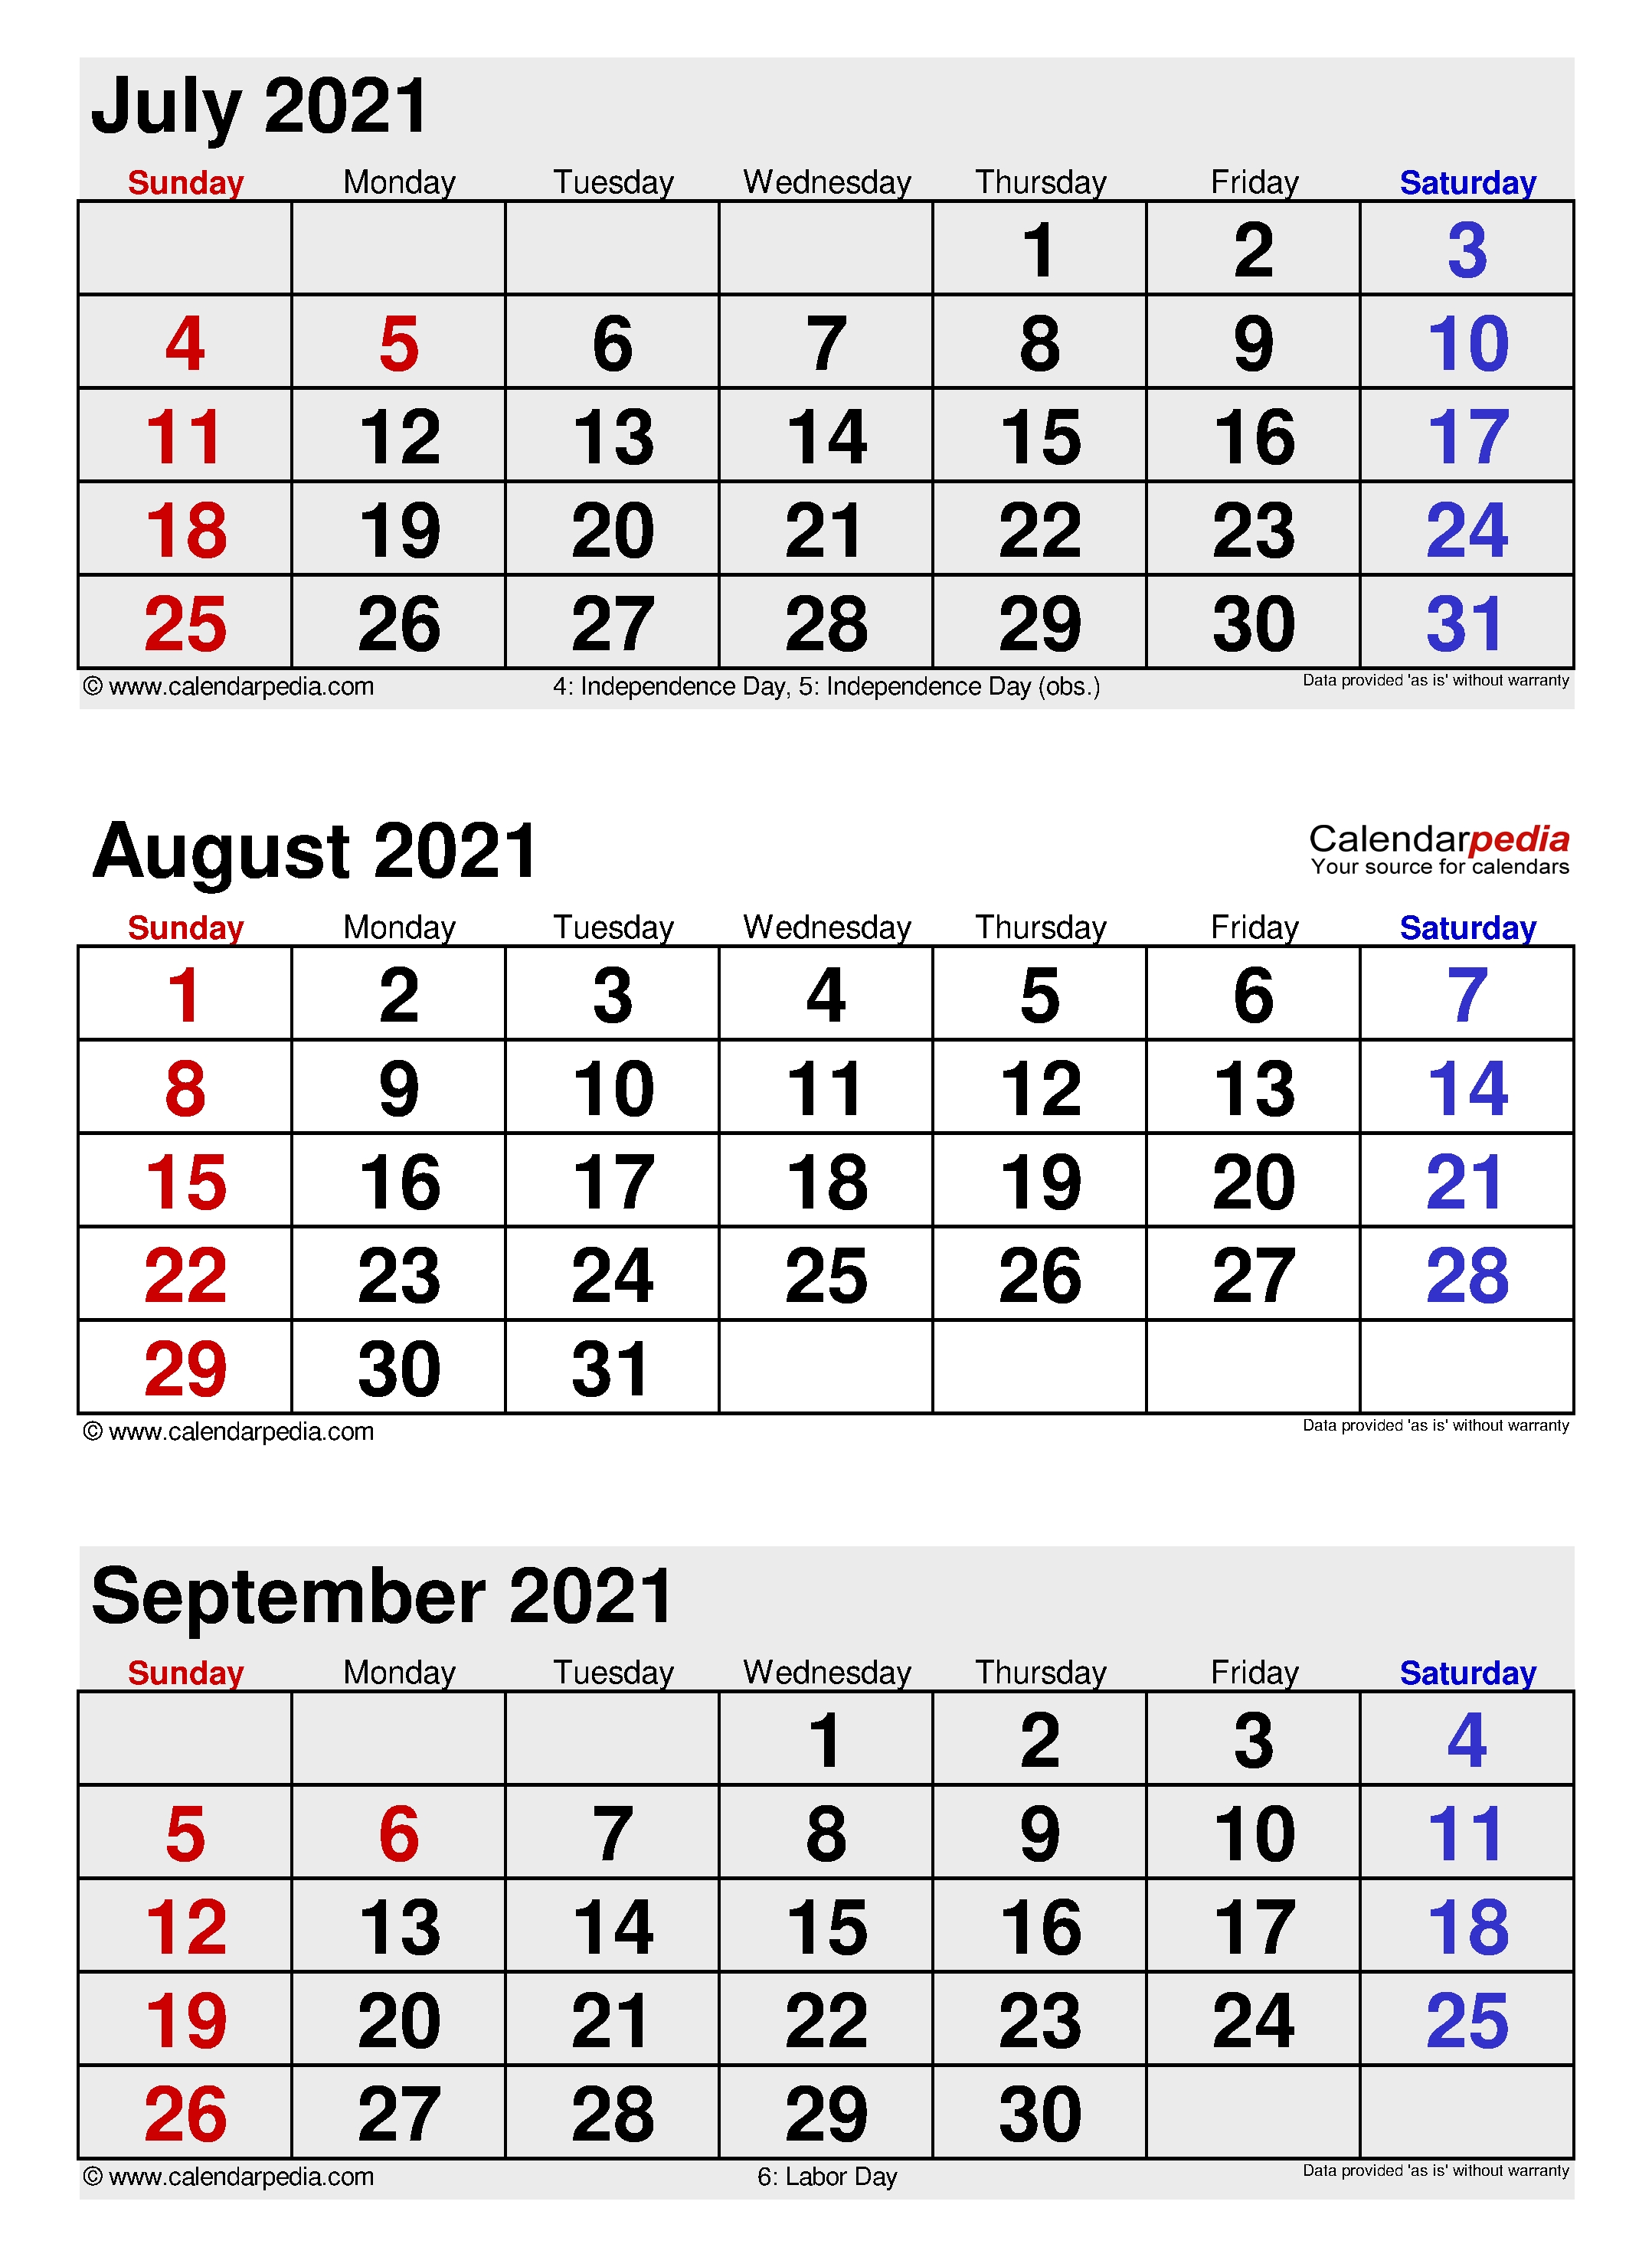 August 2021 - Calendar Templates For Word, Excel And Pdf August 2021 Calendar Starting Monday